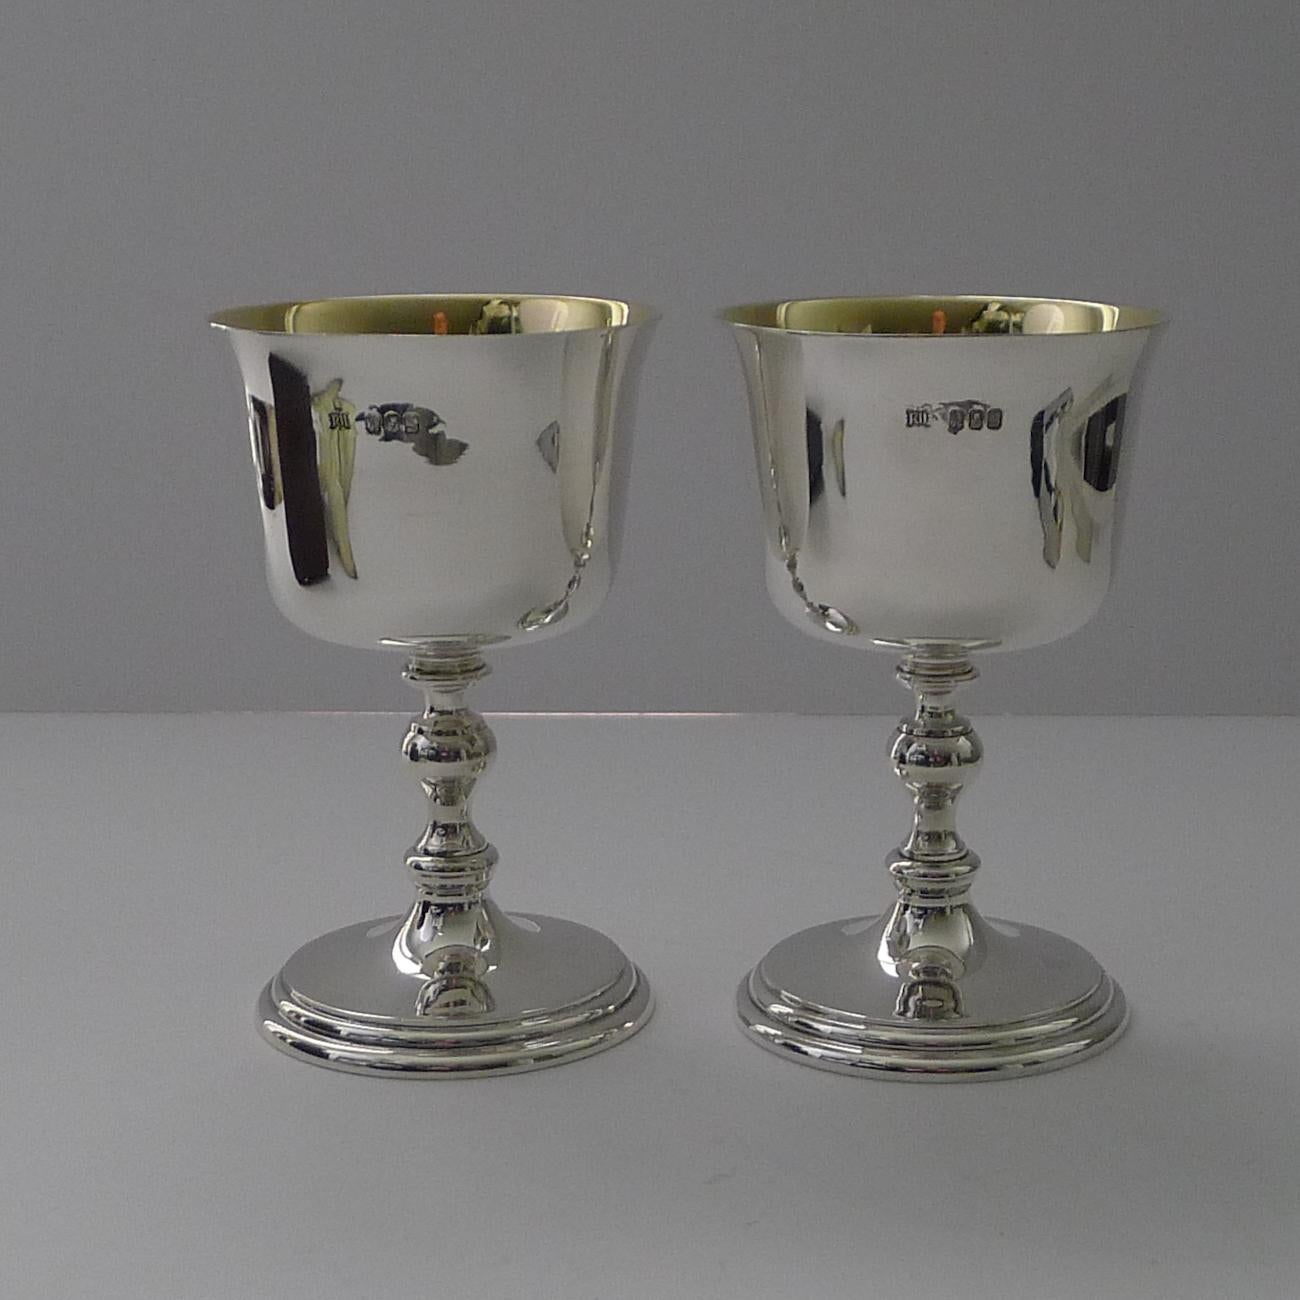 Charles II Grand Large Pair Irish Sterling Silver Wine Goblets - 1974 - 594 Grams For Sale